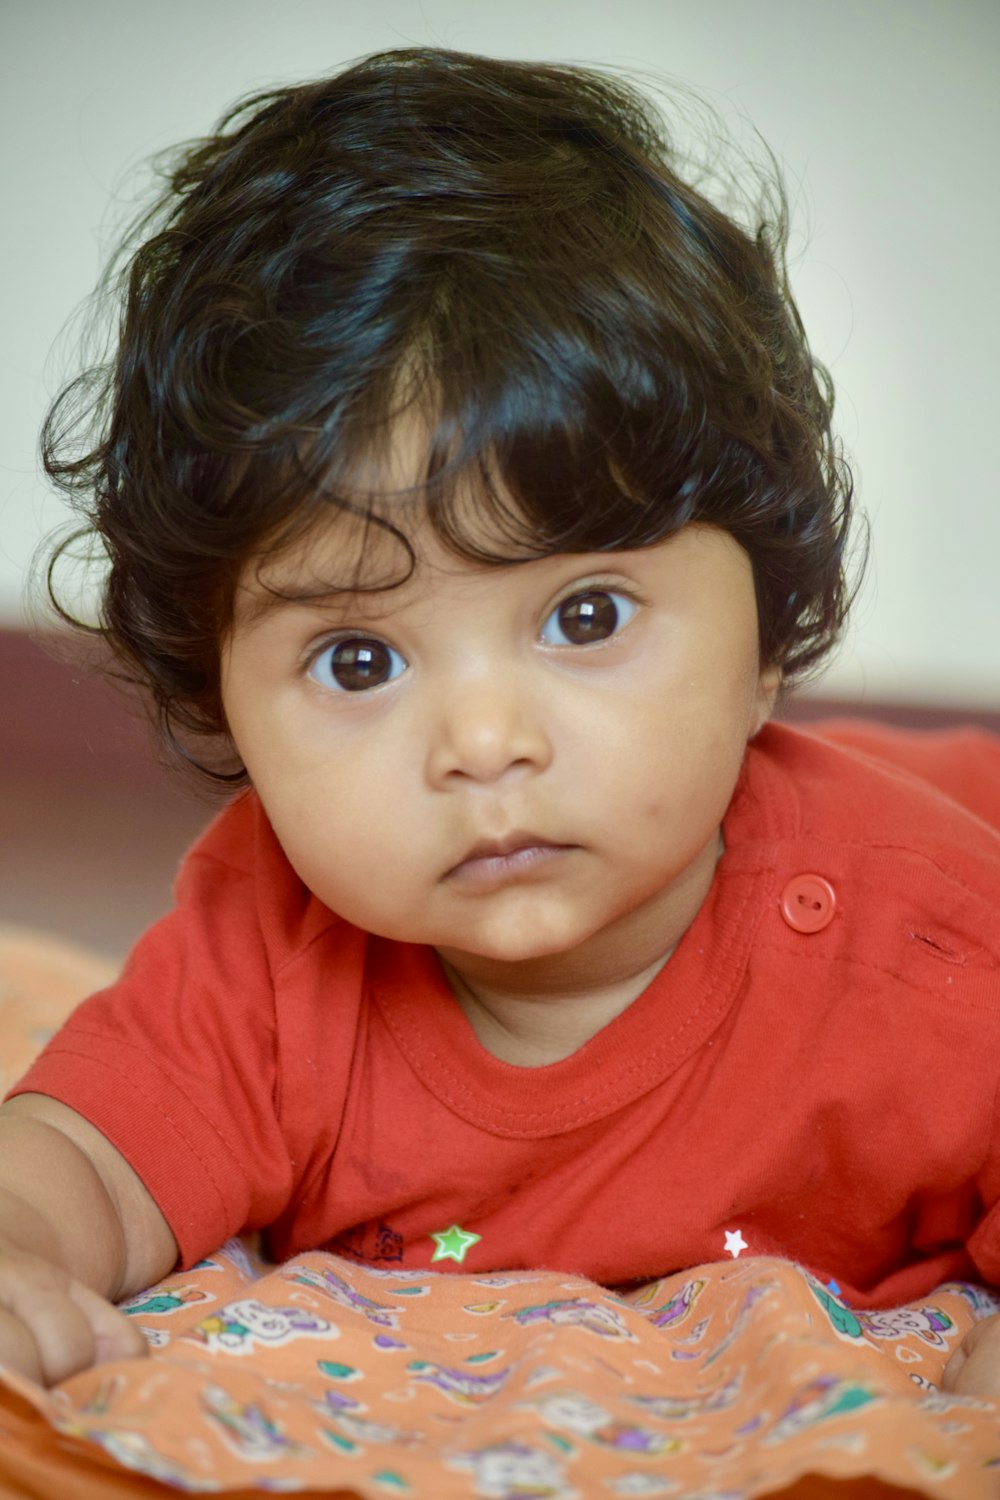 500+ Indian Baby Pictures [HD] | Download Free Images on Unsplash